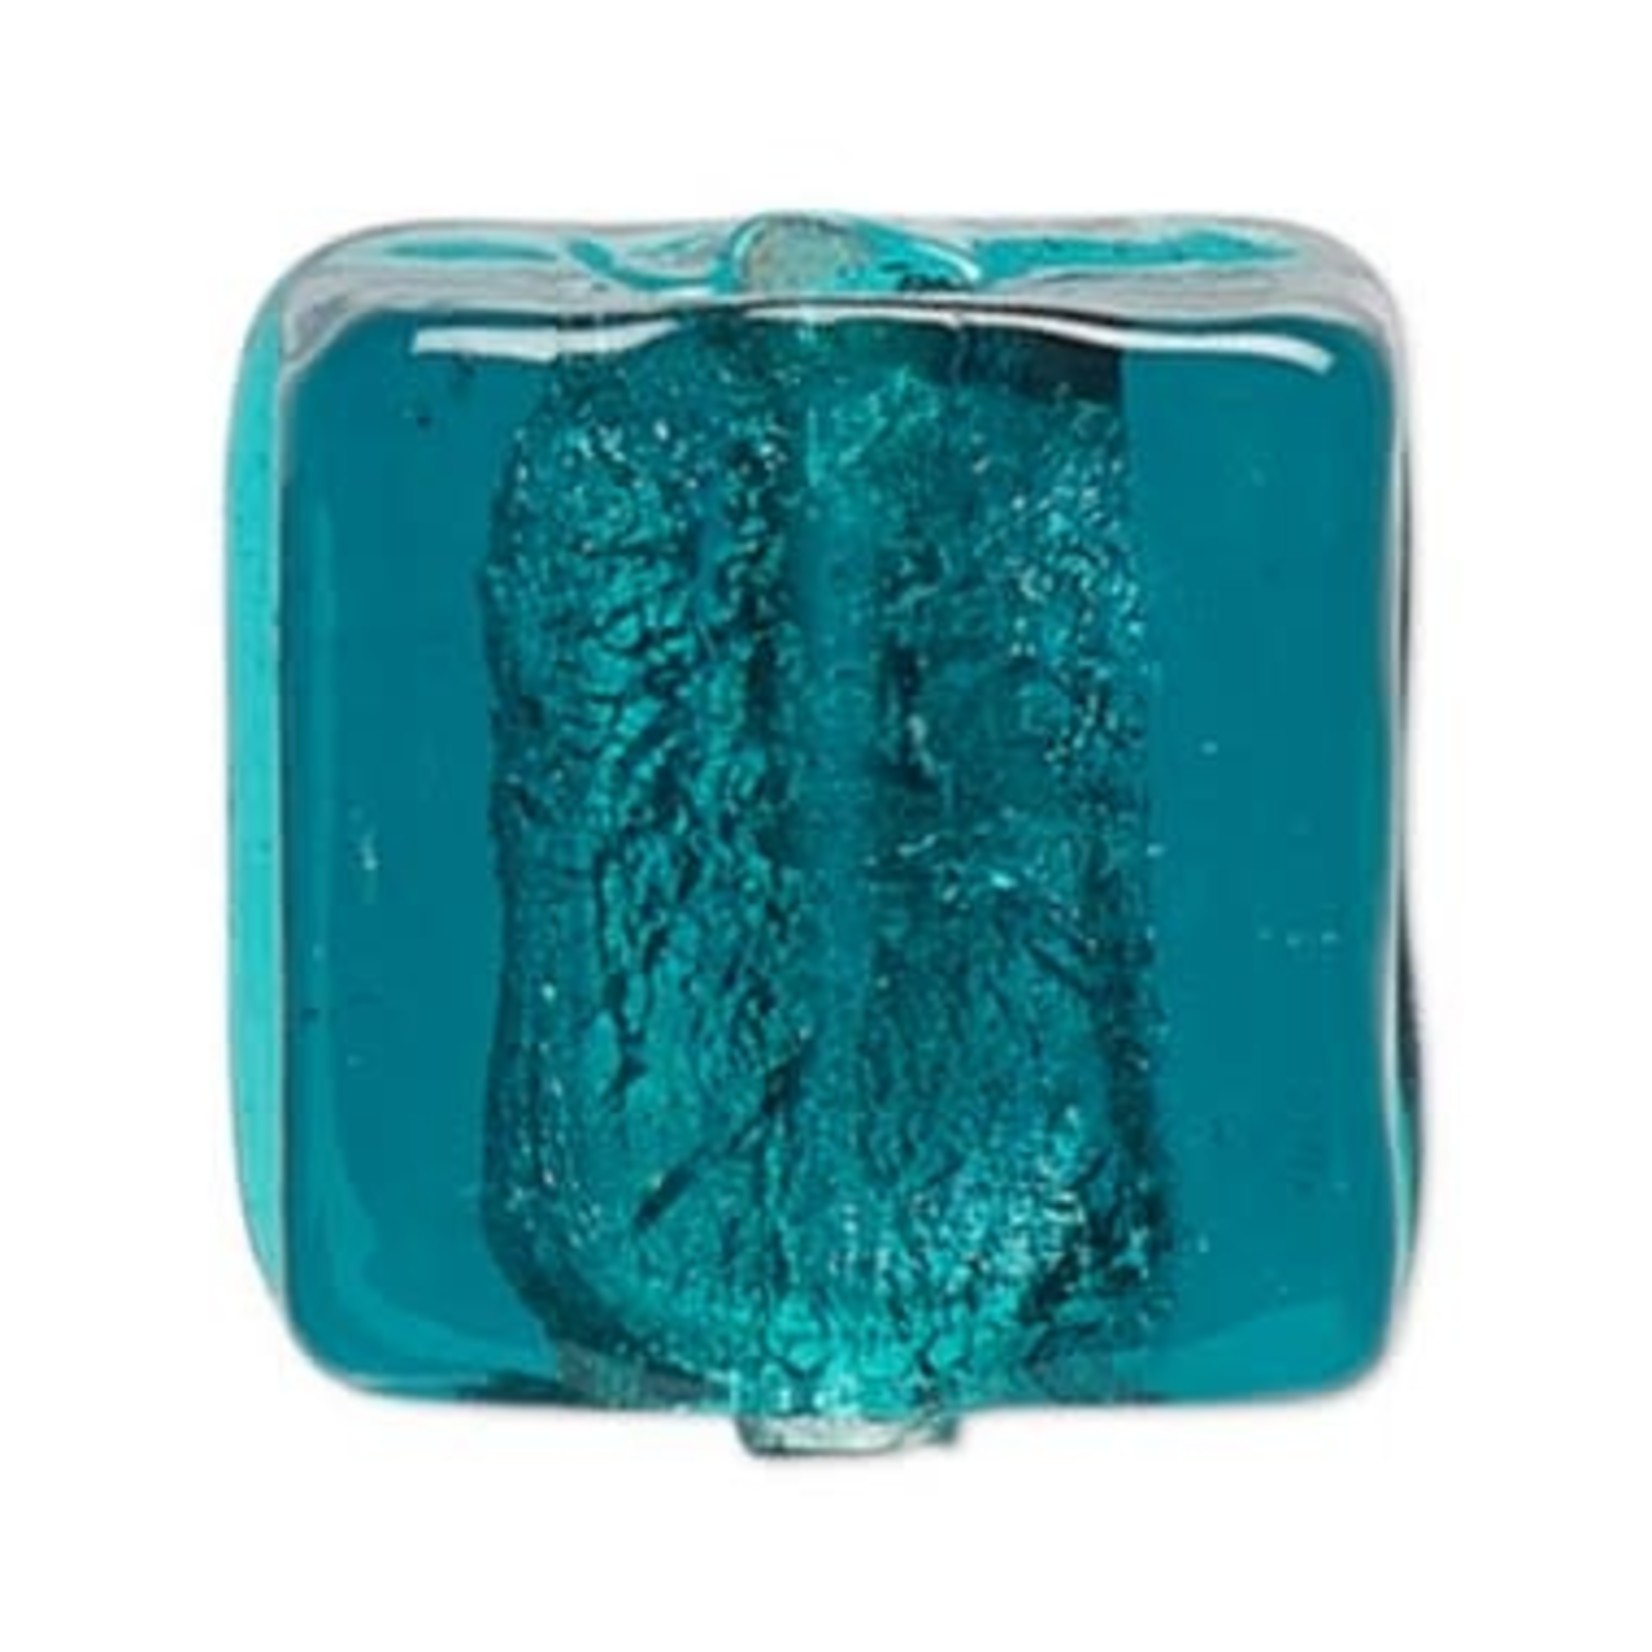 Teal Square Glass Bead